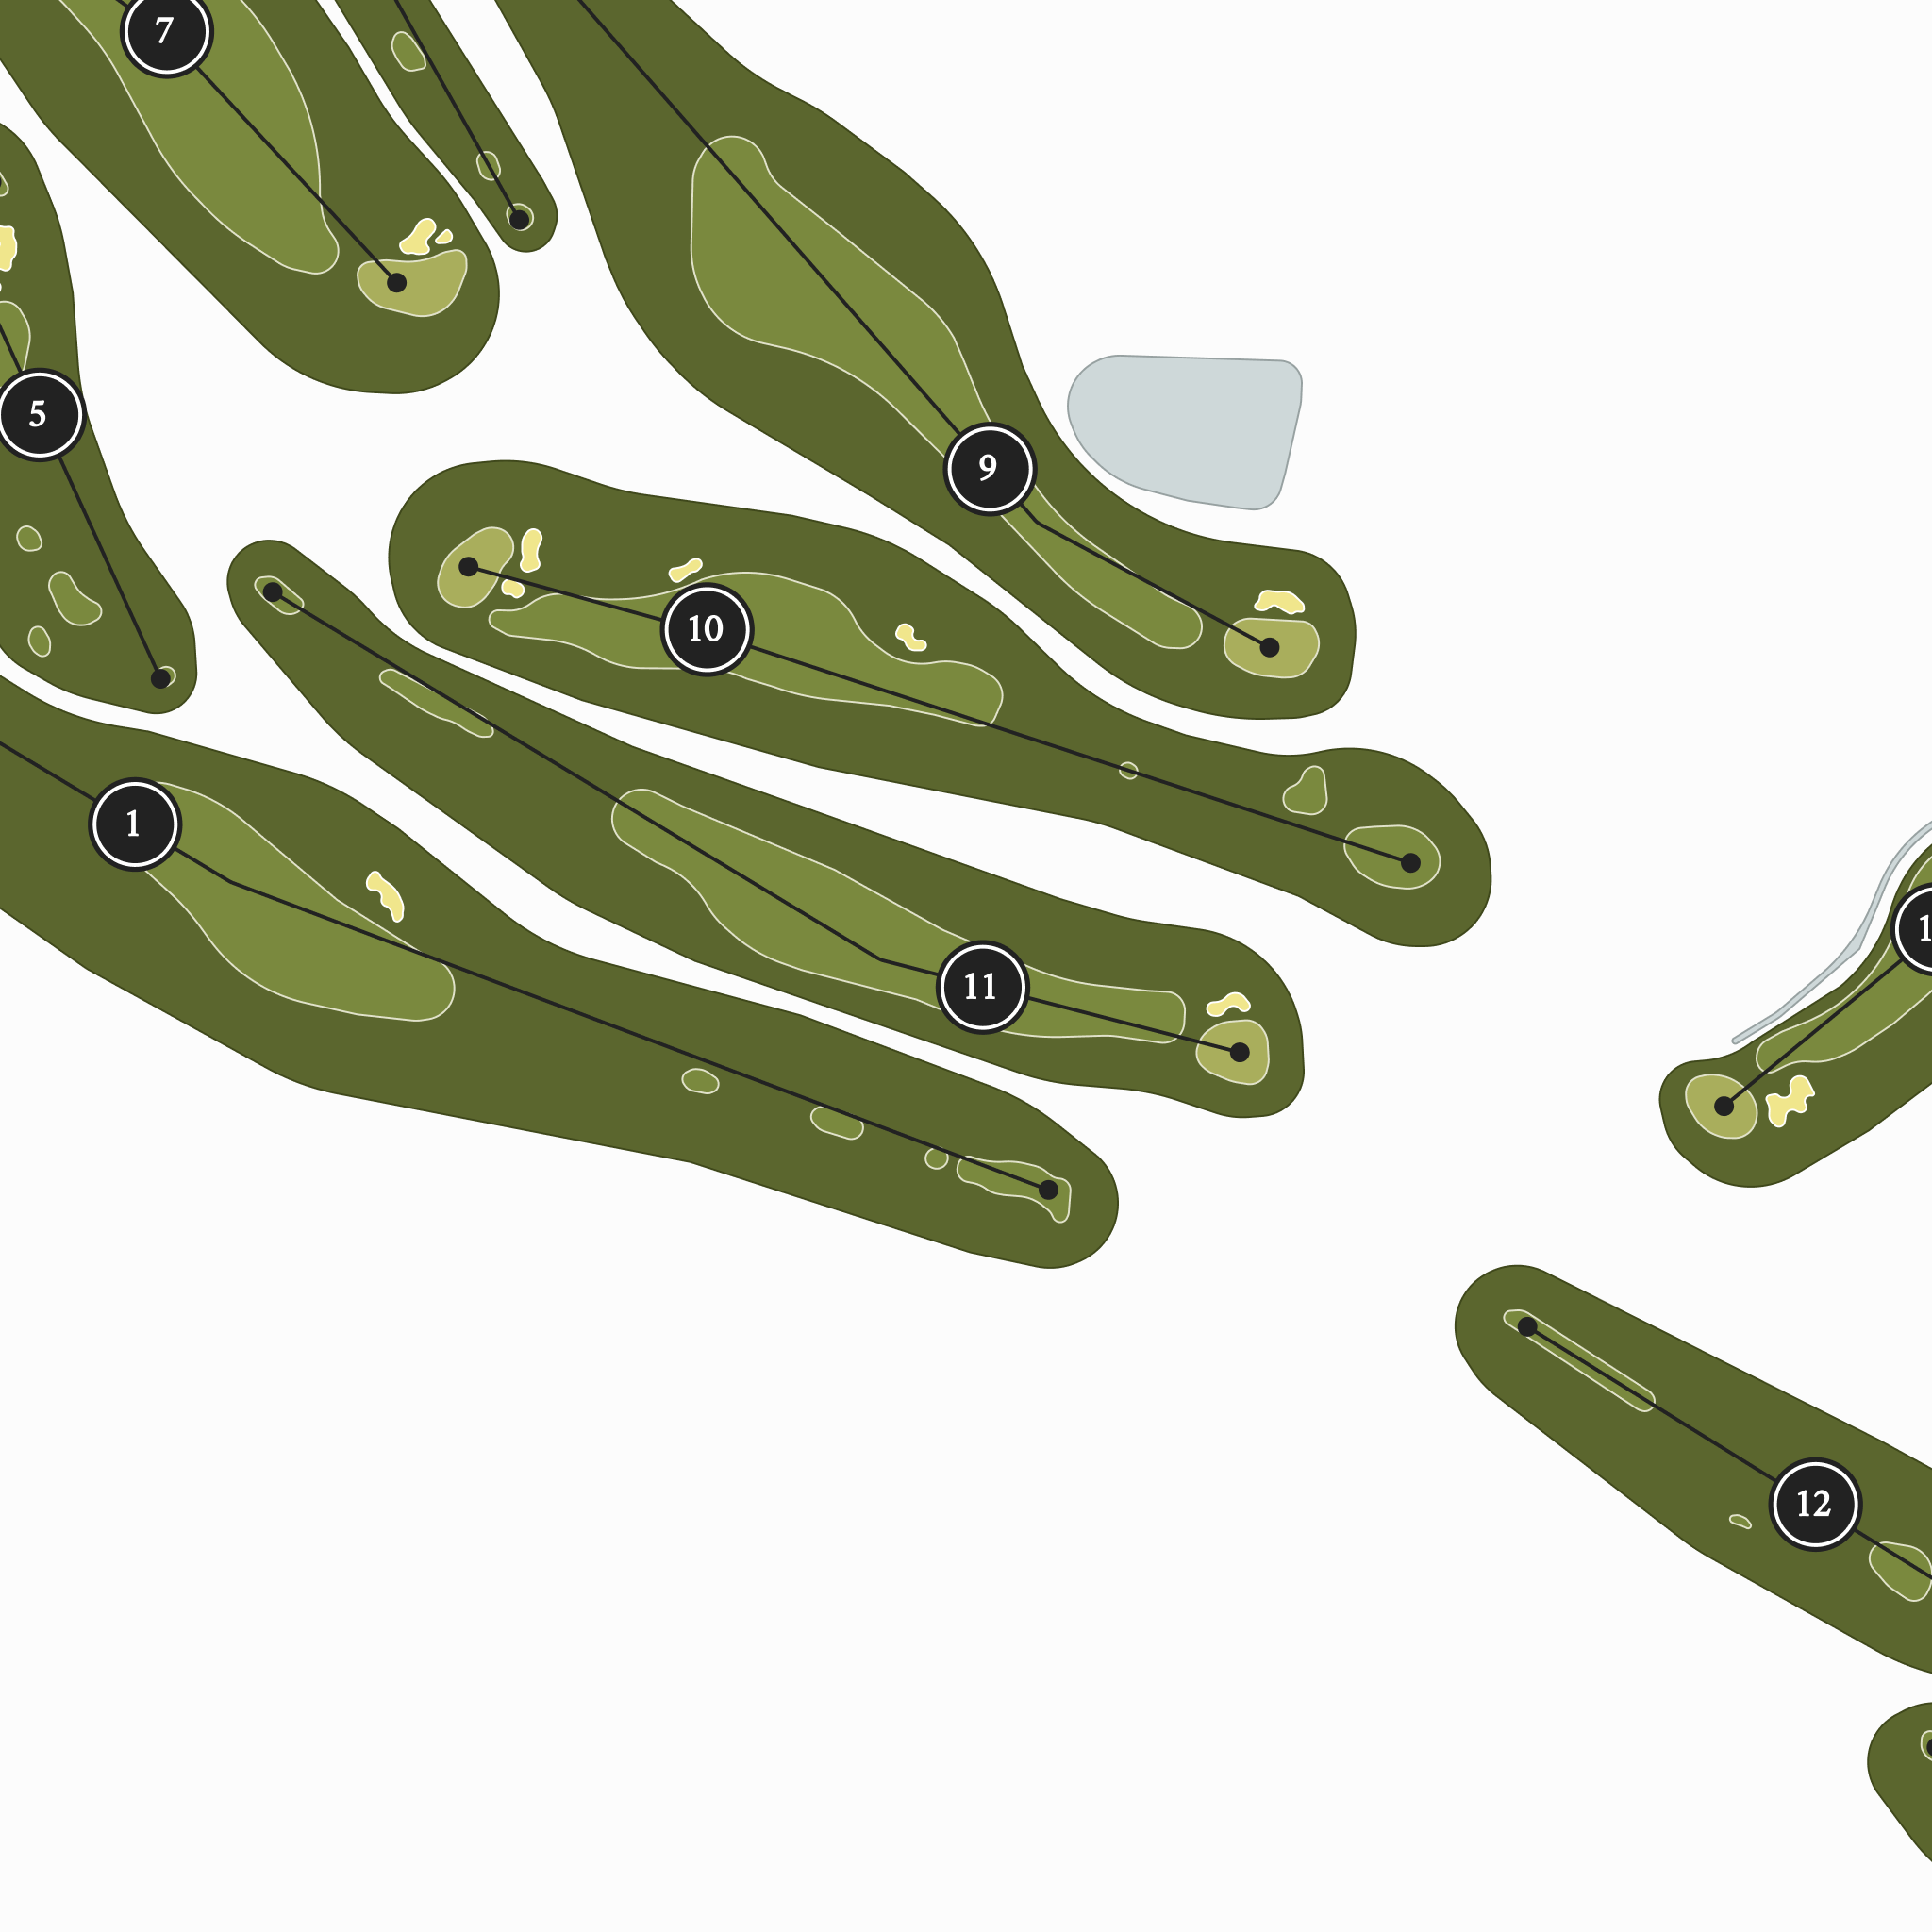 Diamond Creek | Golf Course Map | Close Up With Hole Numbers #hole numbers_yes